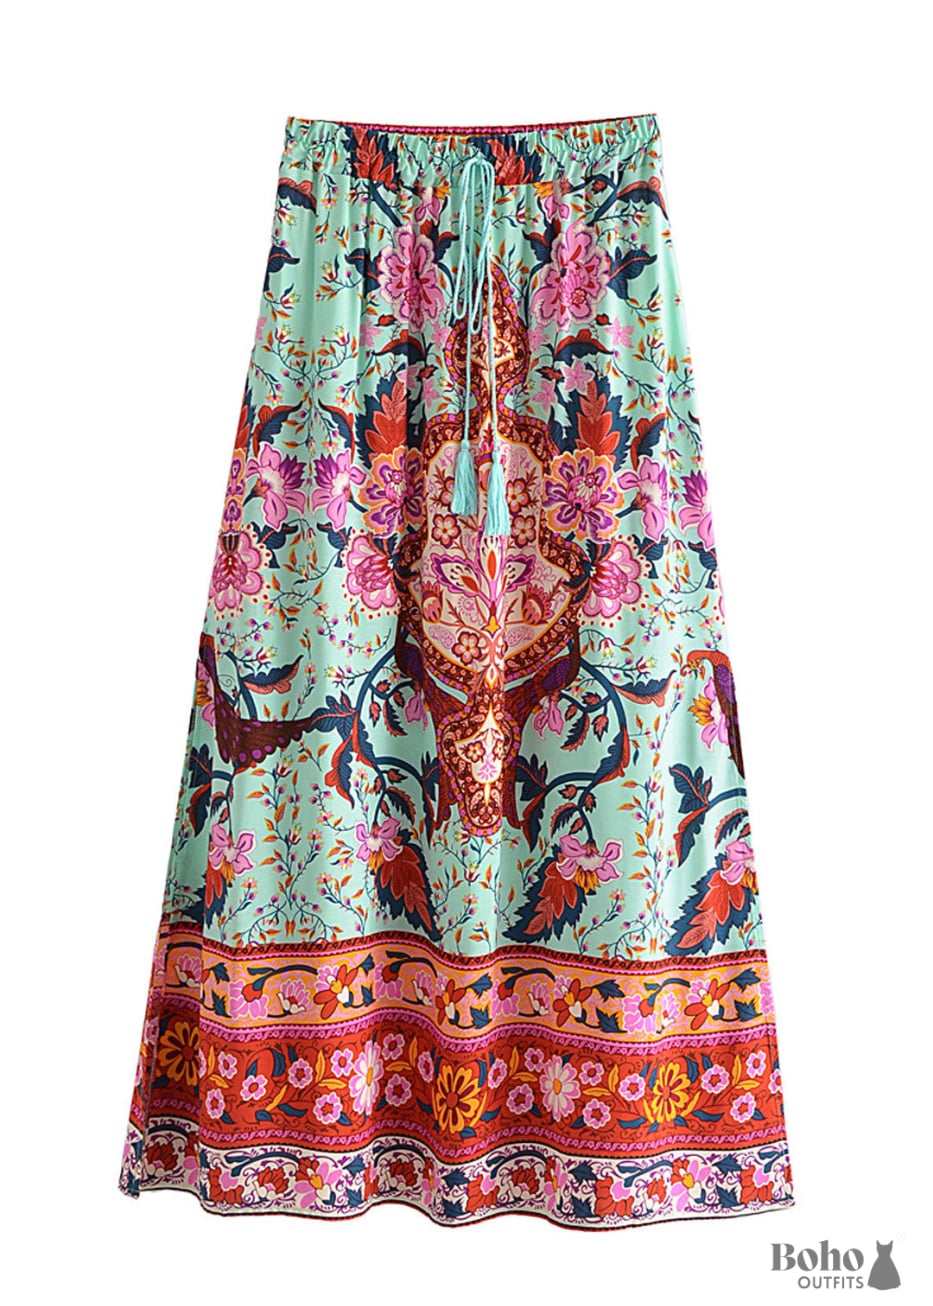 Boho Skirts - Free shipping from Boho Dress Official!